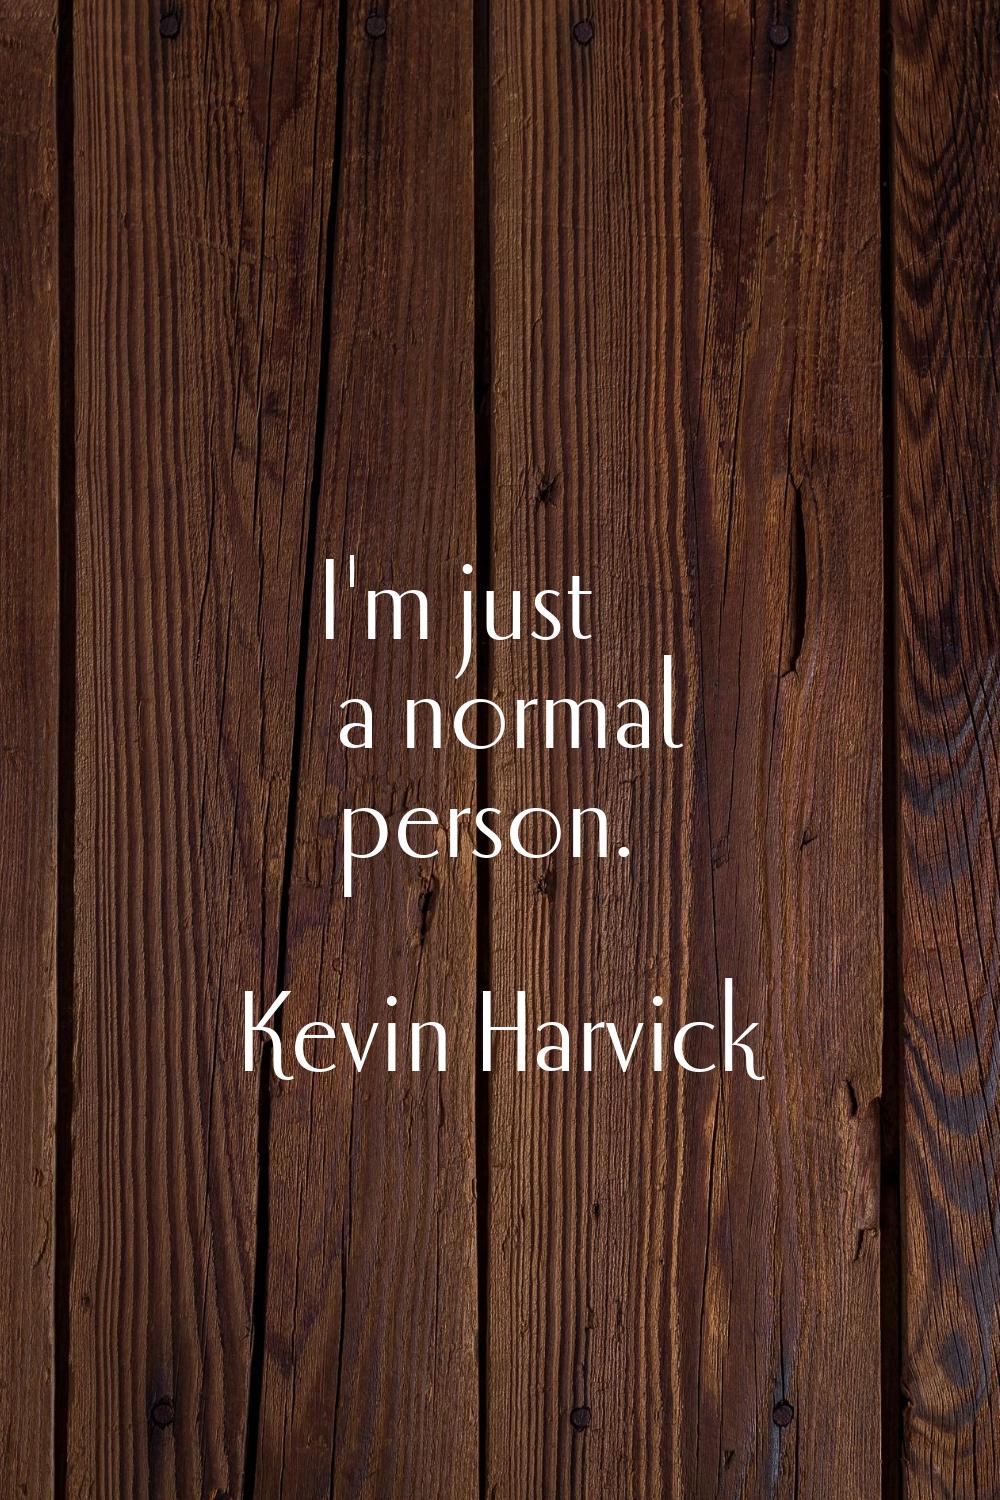 I'm just a normal person.